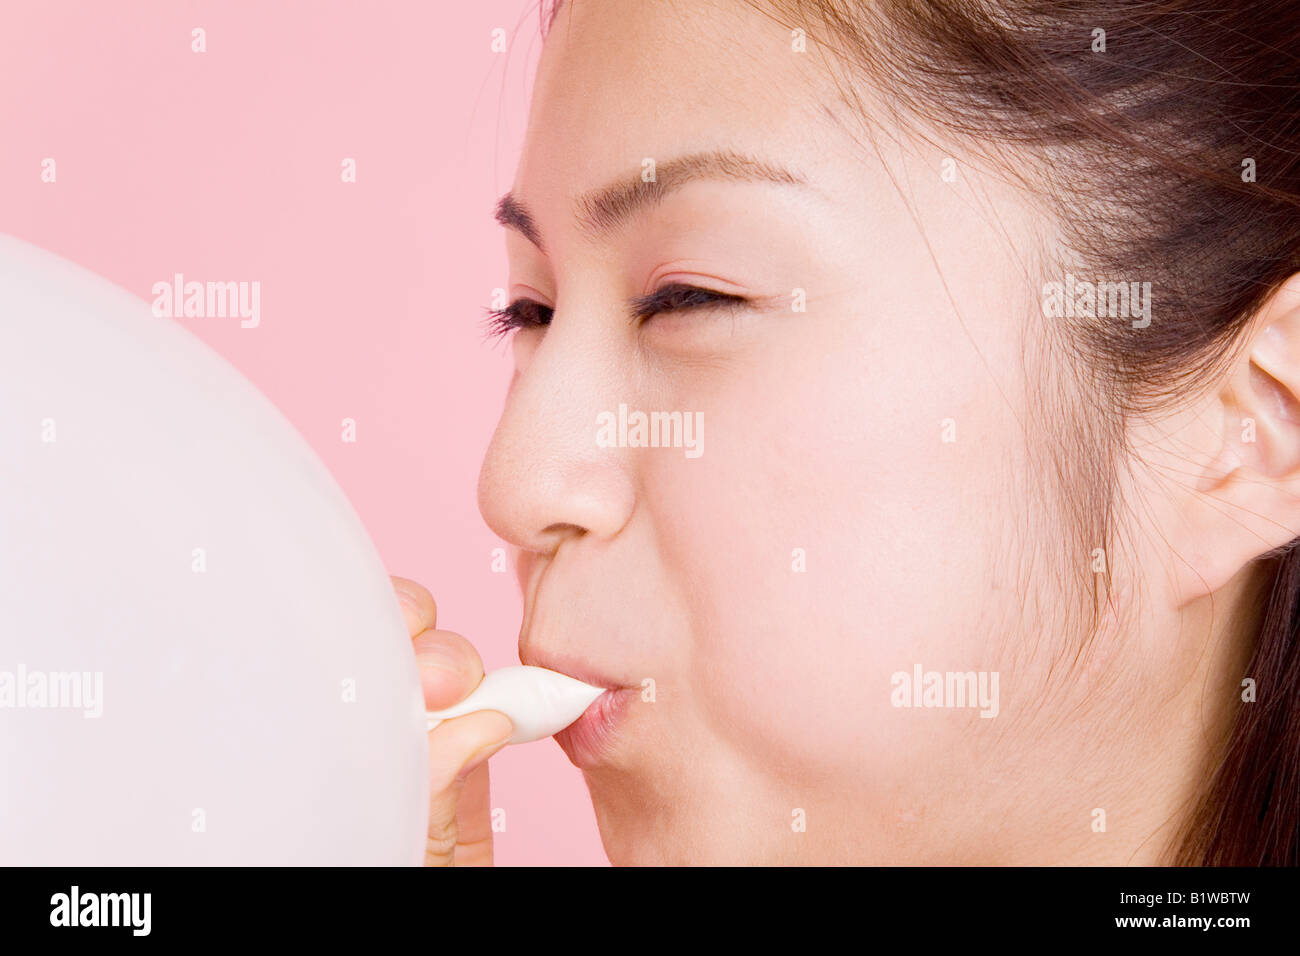 Japanese young woman blowing up a balloon Stock Photo